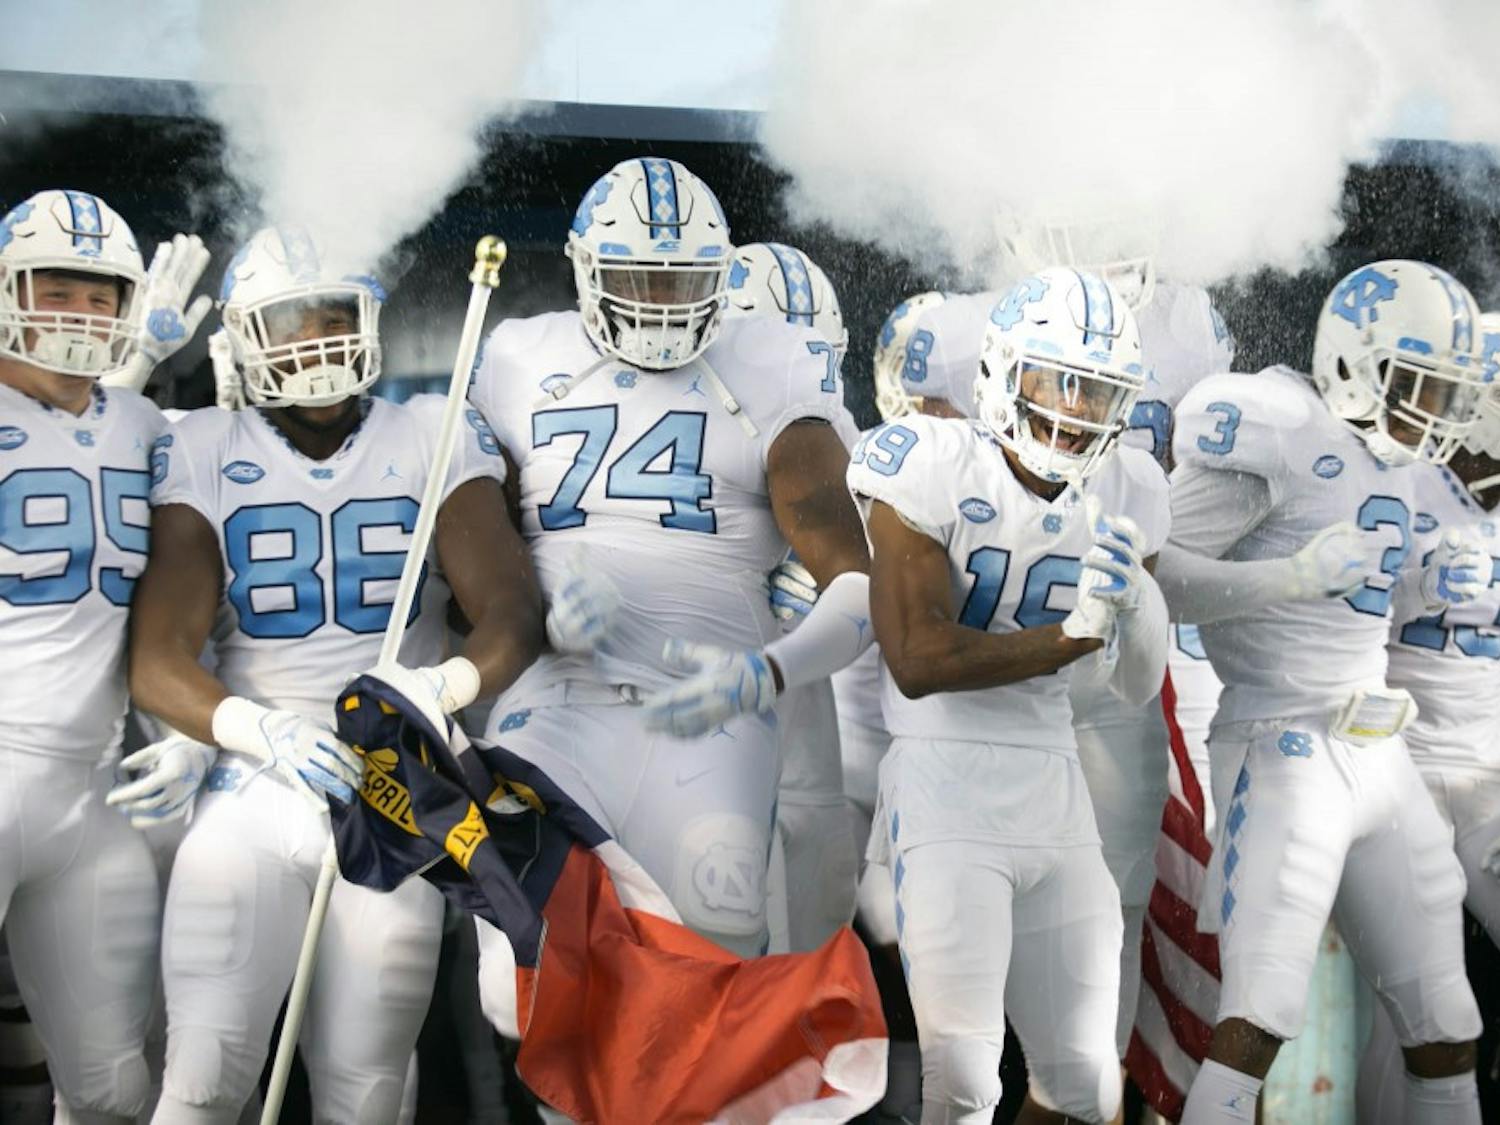 The UNC football team appears in the tunnel before the game against Virginia Tech on Saturday, Oct. 13, 2018 in Kenan Memorial Stadium. Virginia Tech defeated UNC 22-19.